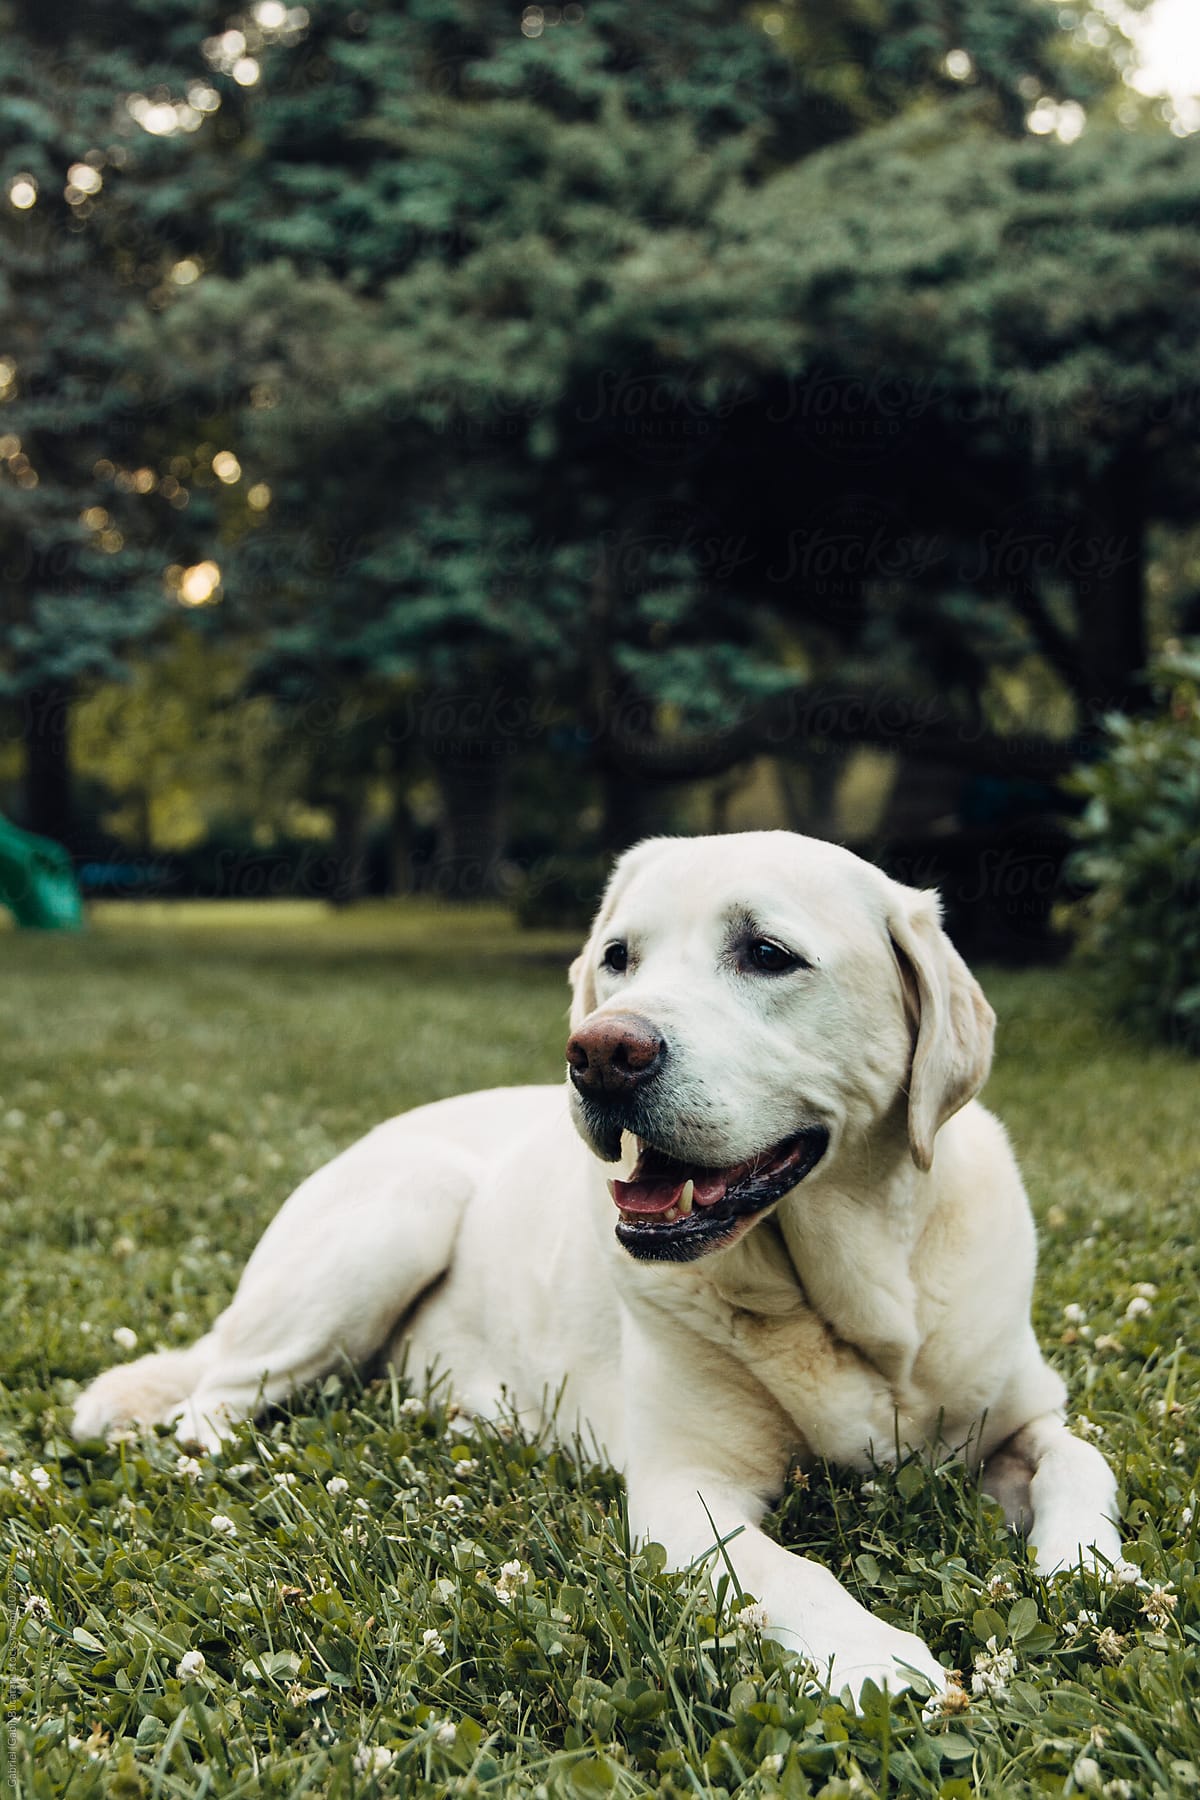 A white dog laying on a lawn